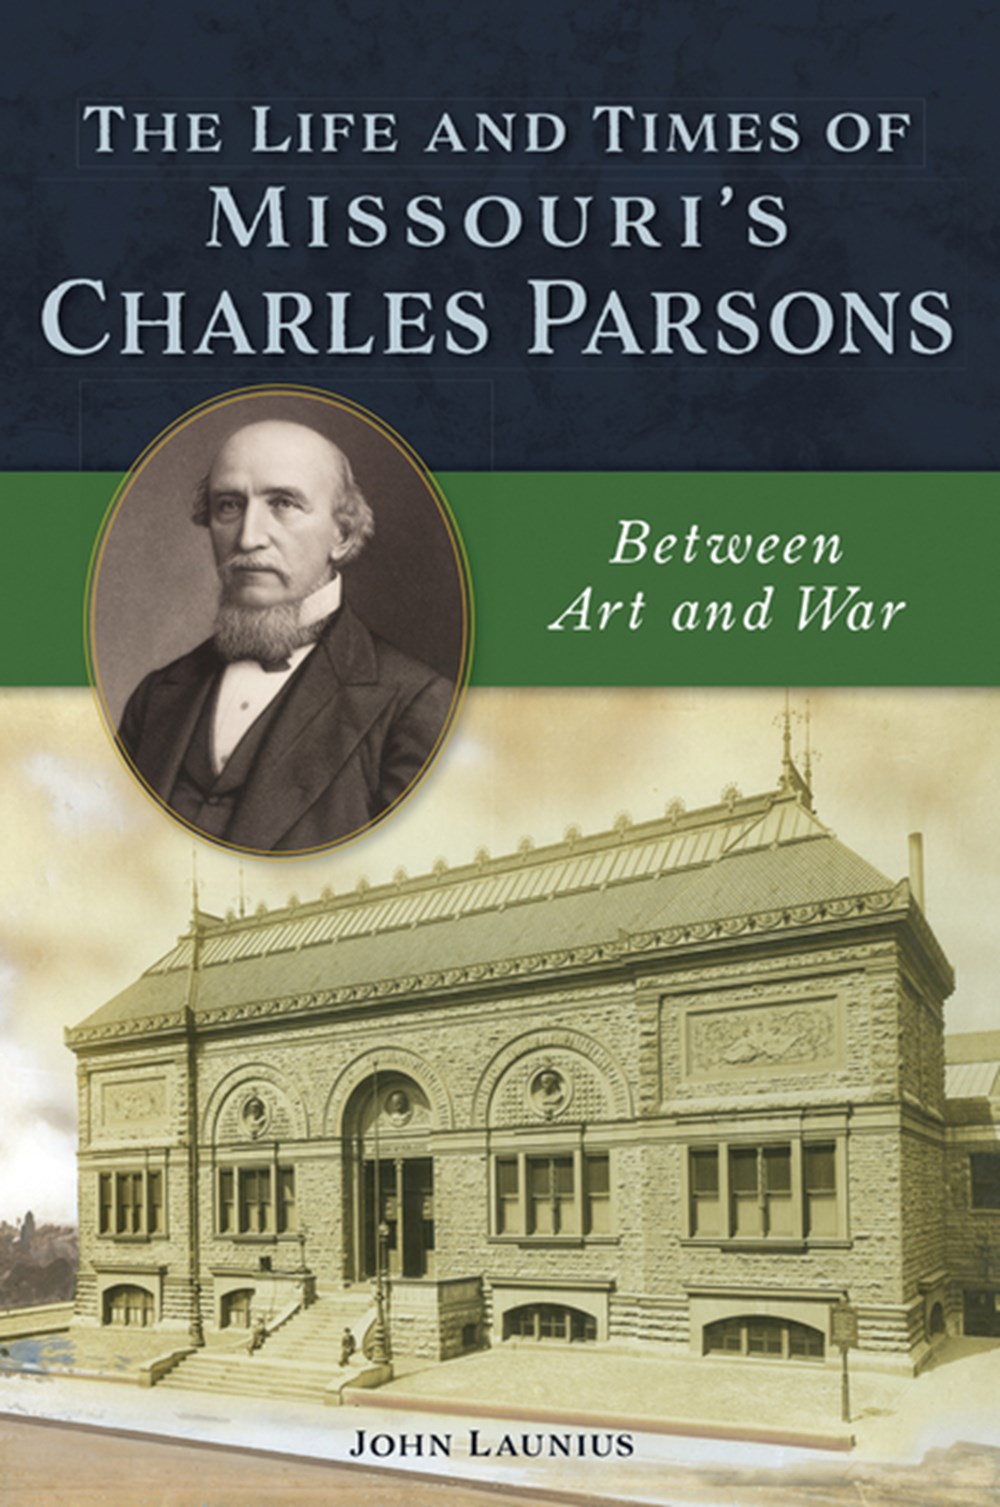 Life and Times of Missouri's Charles Parsons: Between Art and War